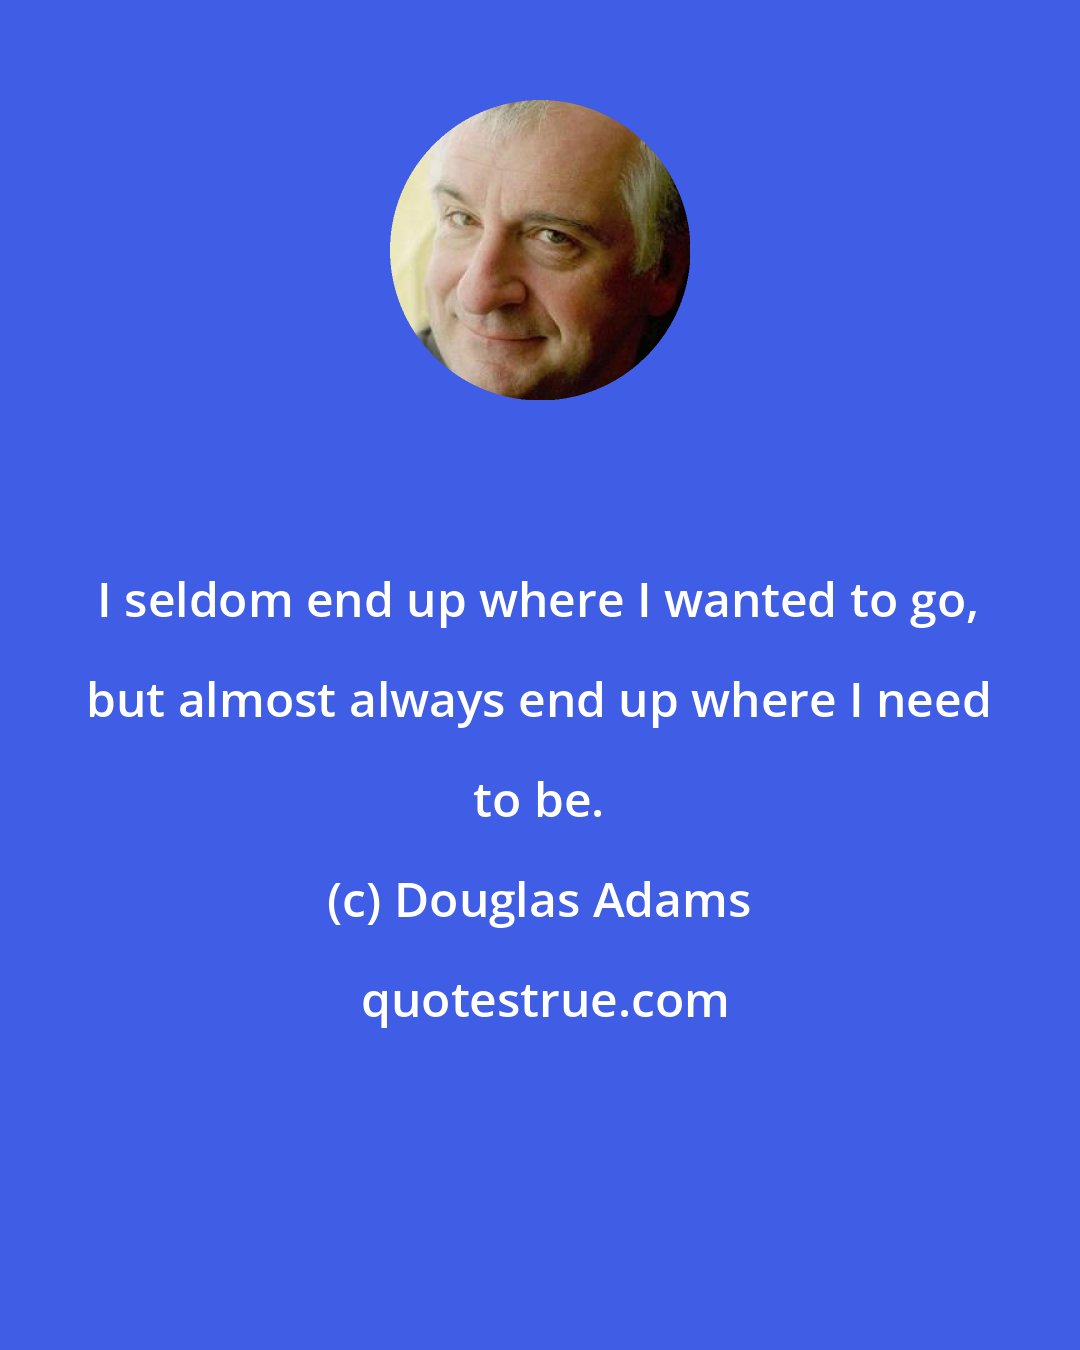 Douglas Adams: I seldom end up where I wanted to go, but almost always end up where I need to be.